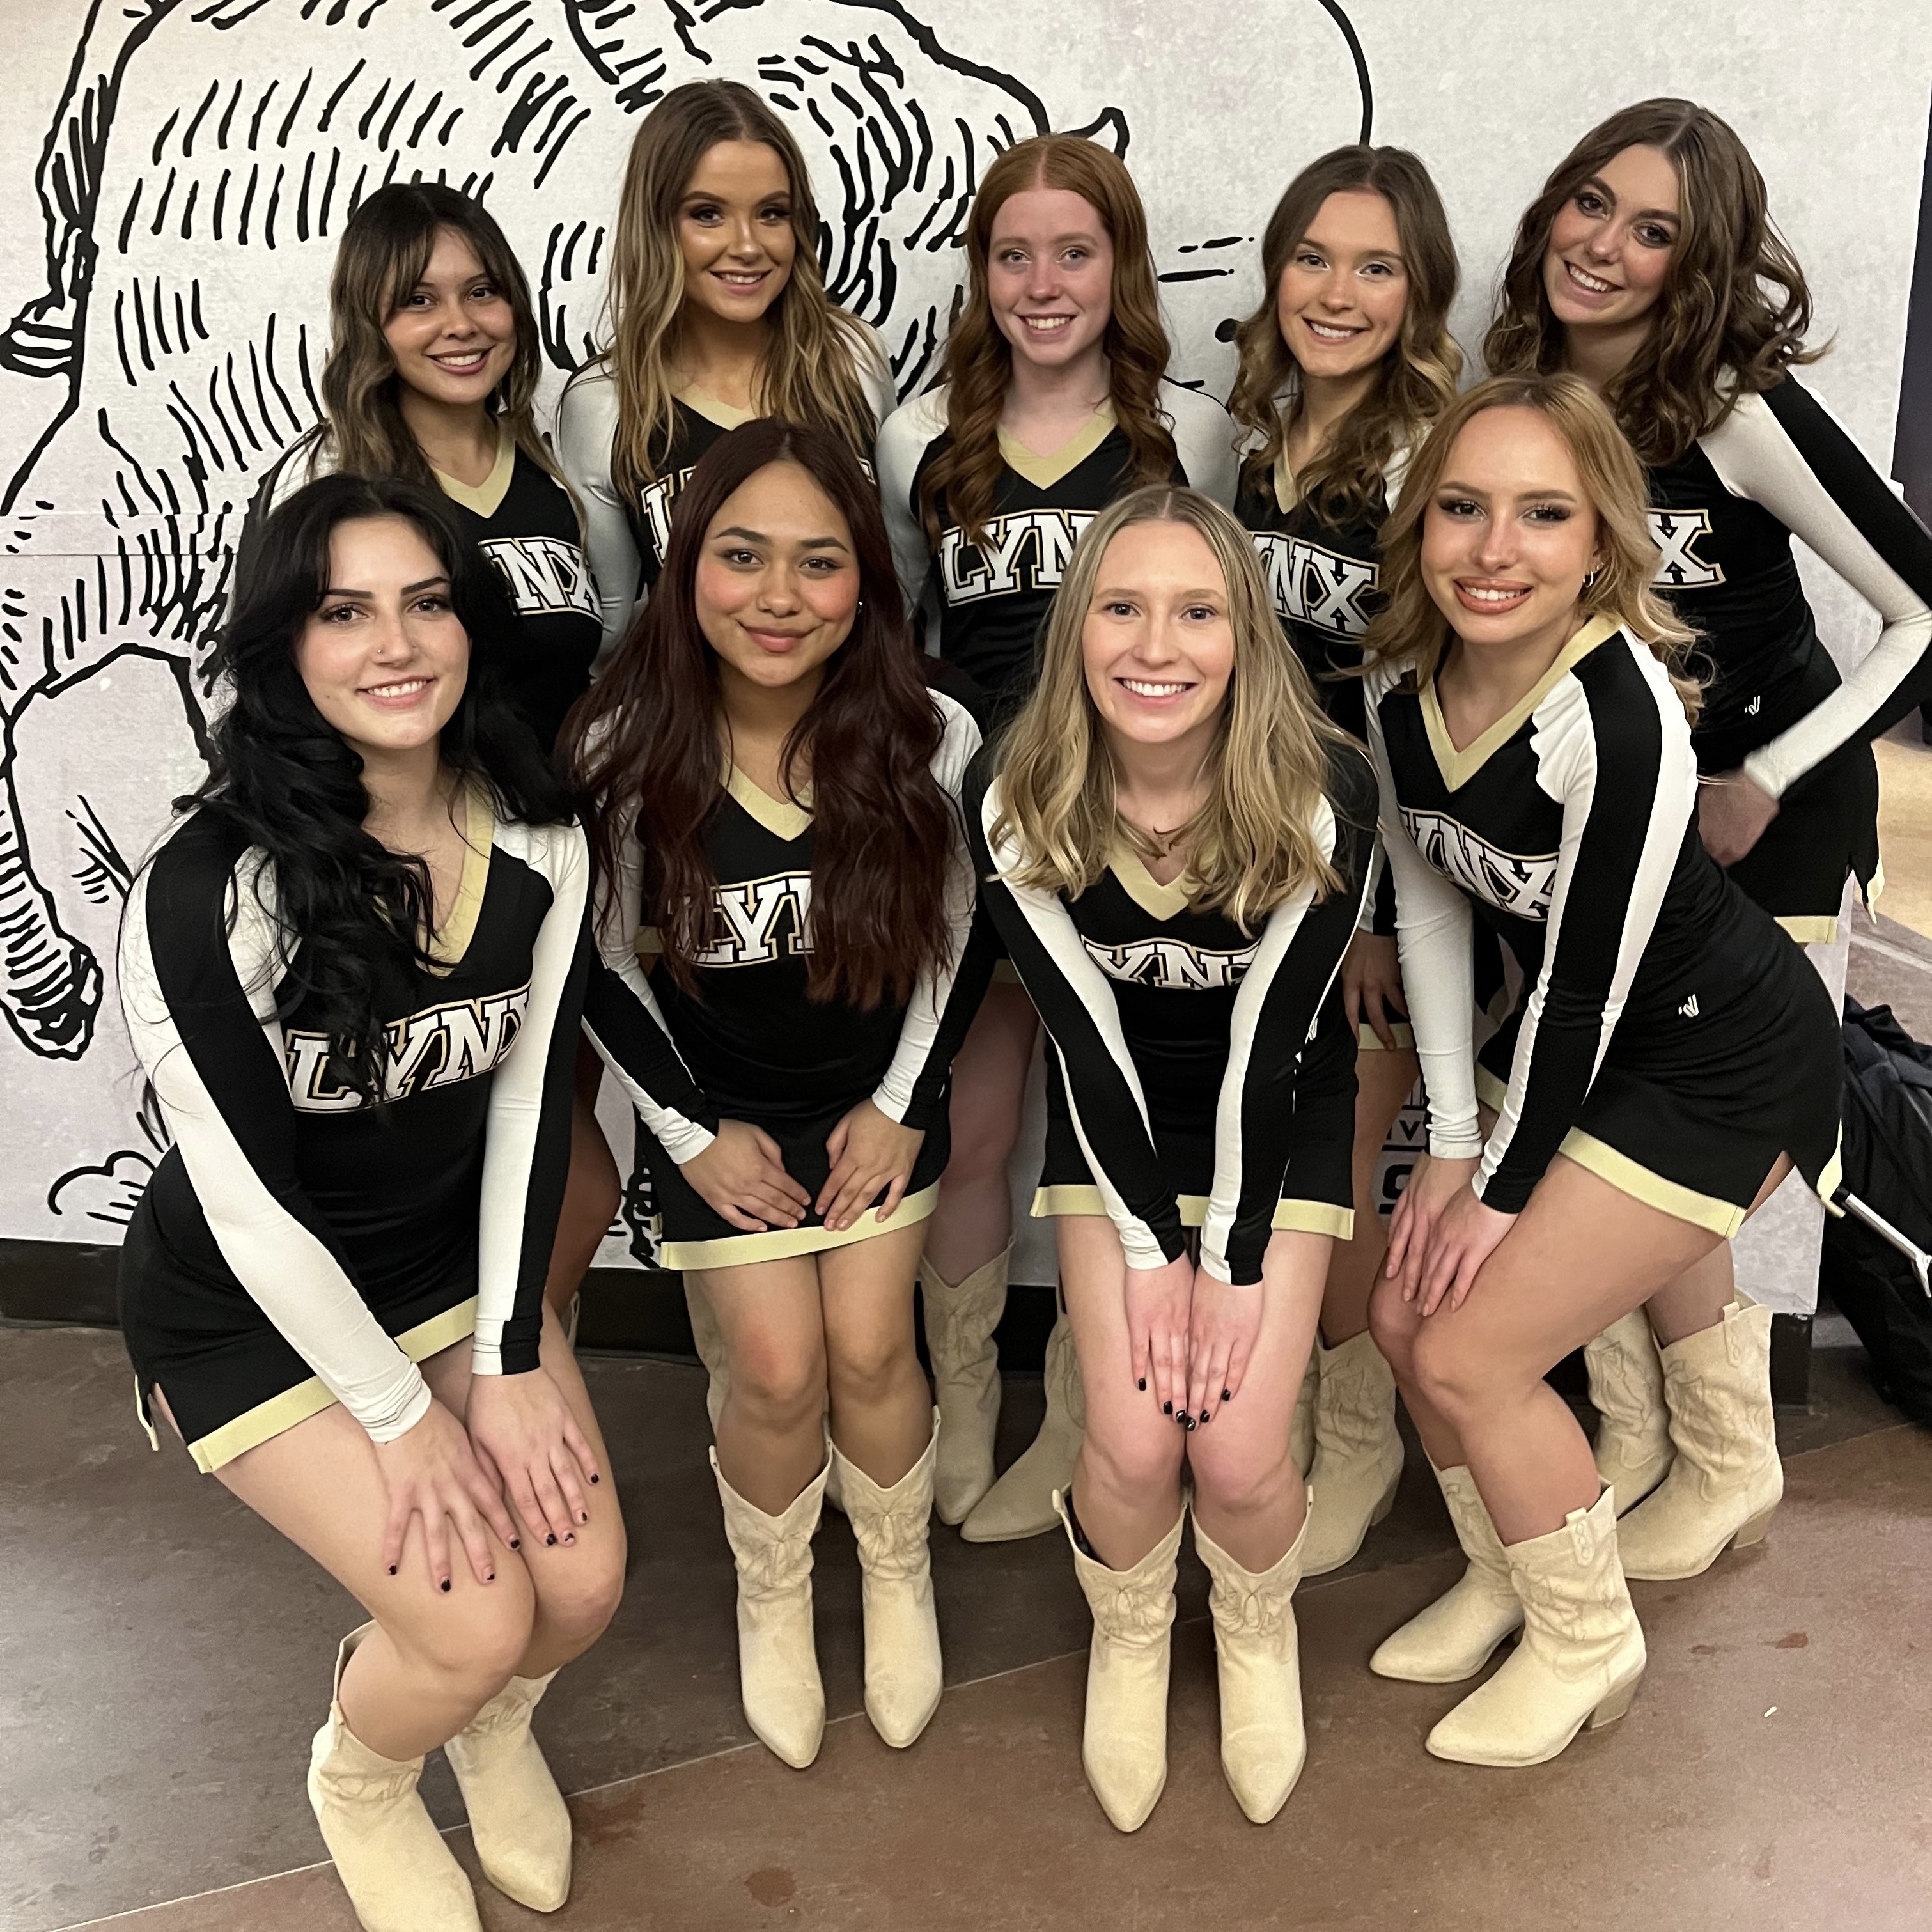 CU Denver Cheer Team at the Rodeo